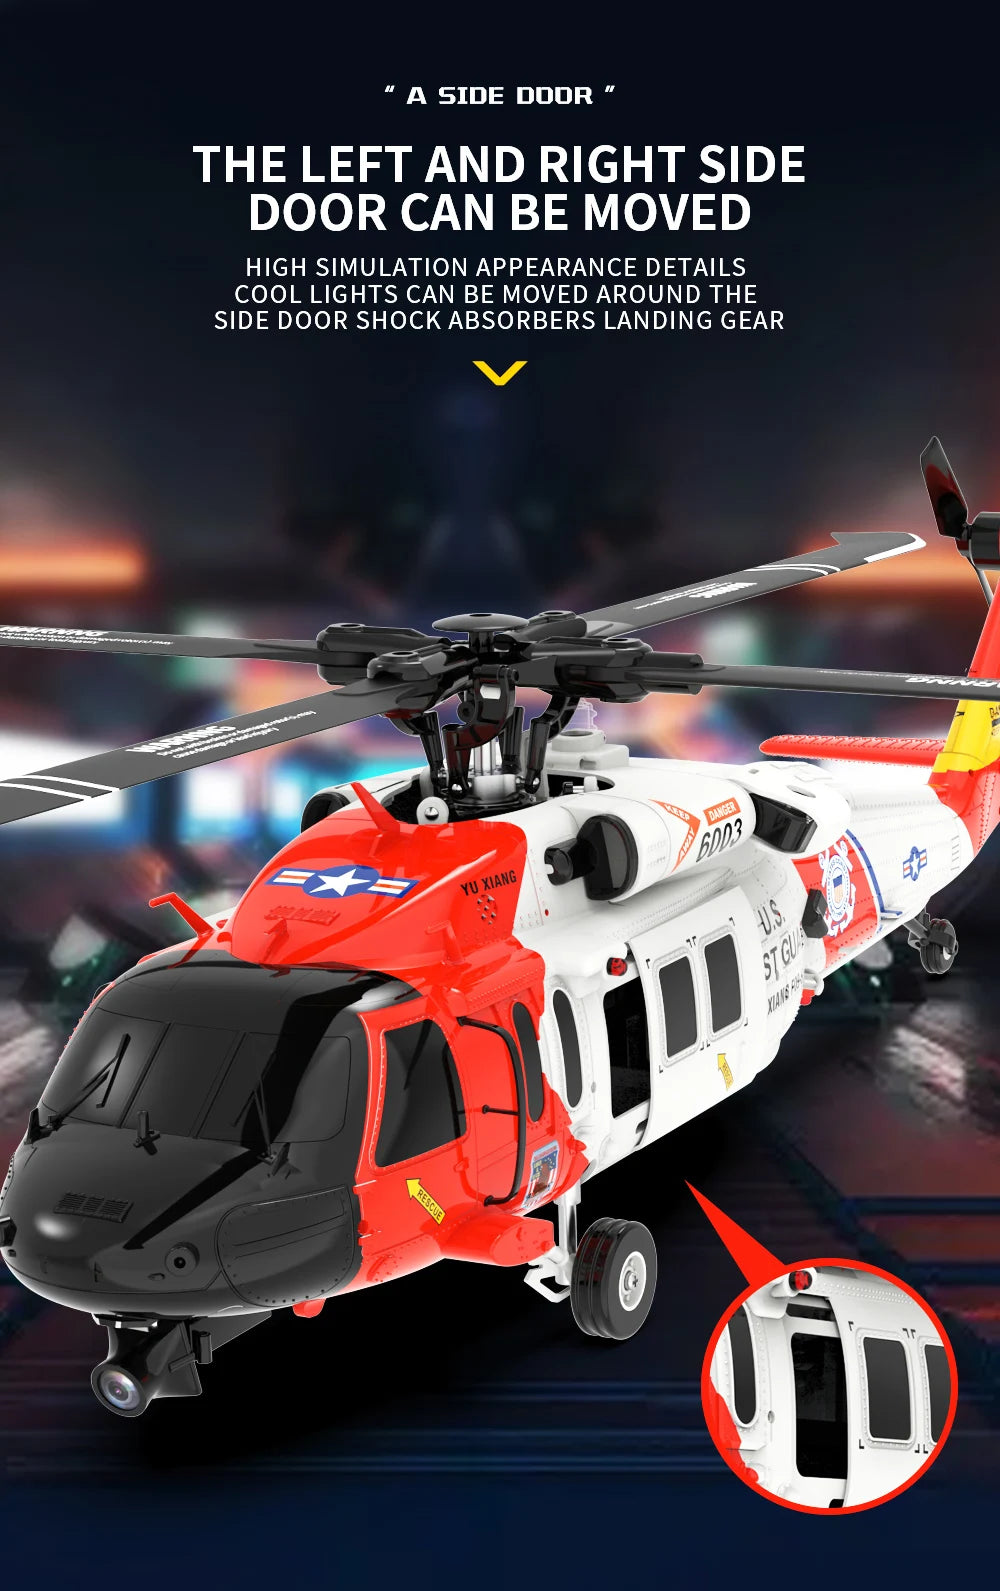 YXZNRC F09-S Flybarless RC Helicopter, A SIDE DOOR CAN BE MOVED HIGH SIMULATION APPEARANCE